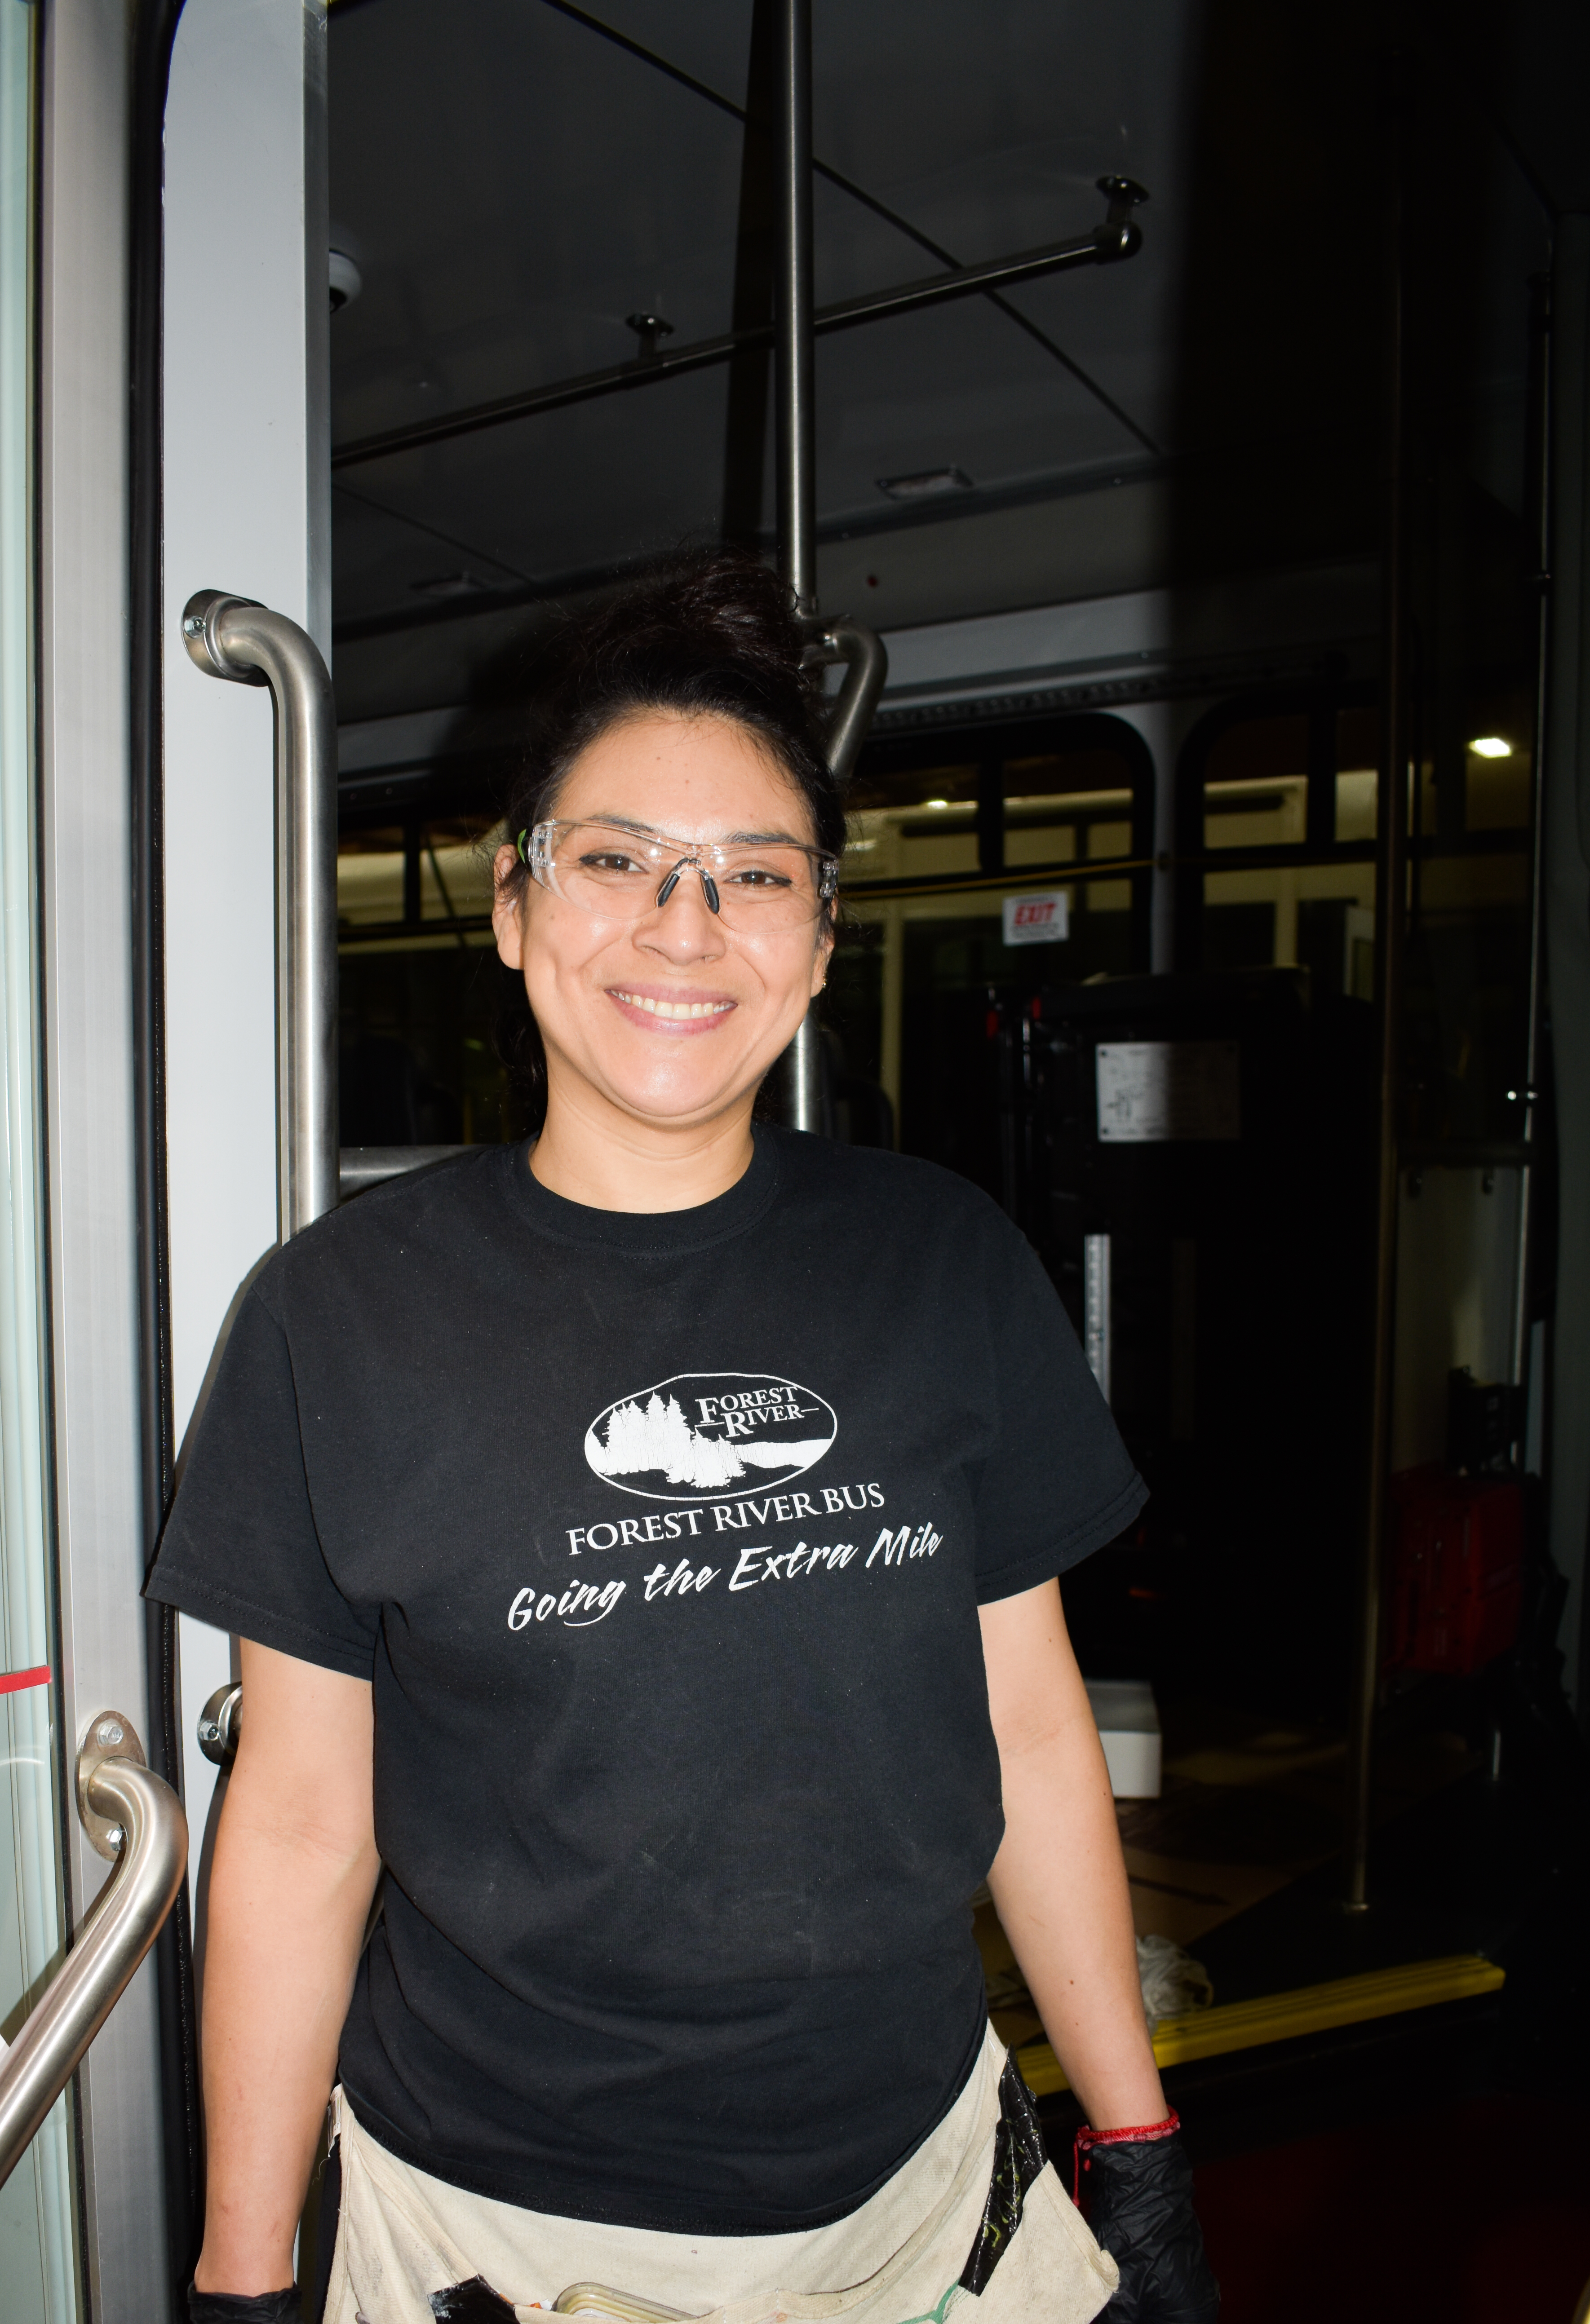 Image of Mirna, a Forest River Bus Employee